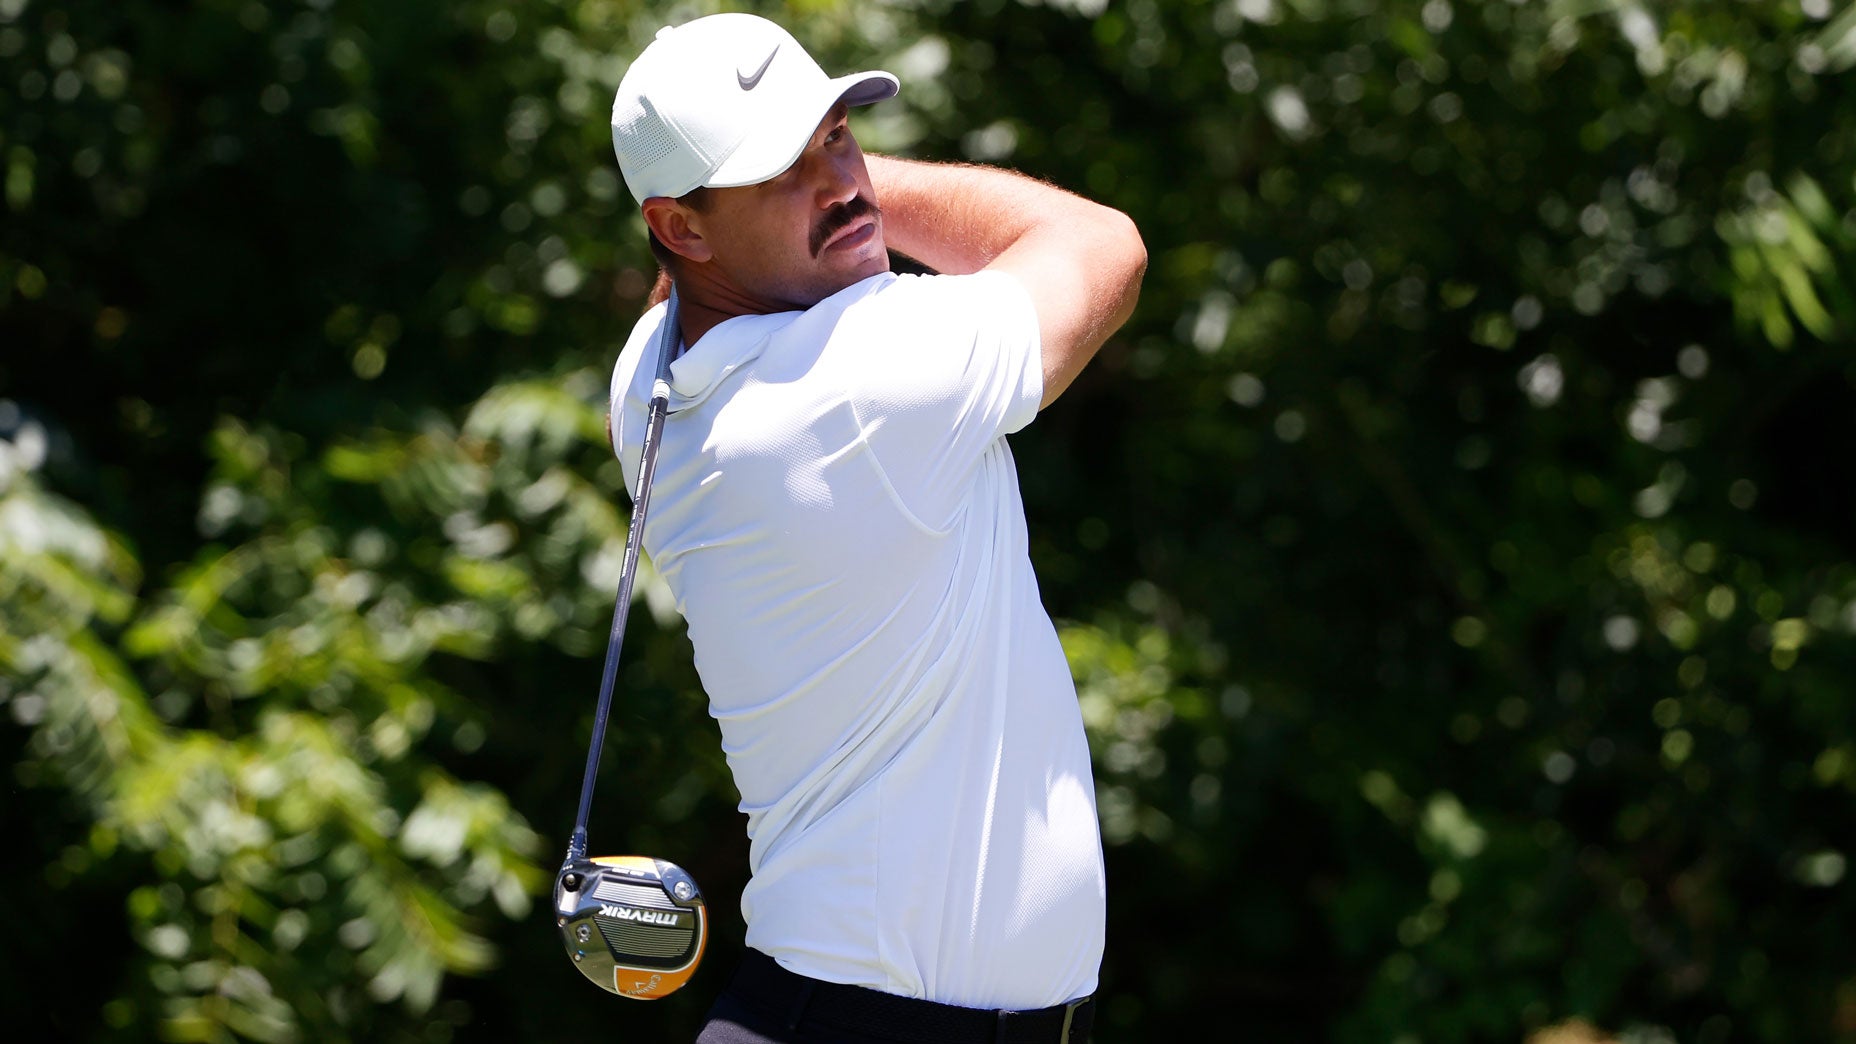 Brooks Koepka's colorful language marks latest chapter in mic'd up debate